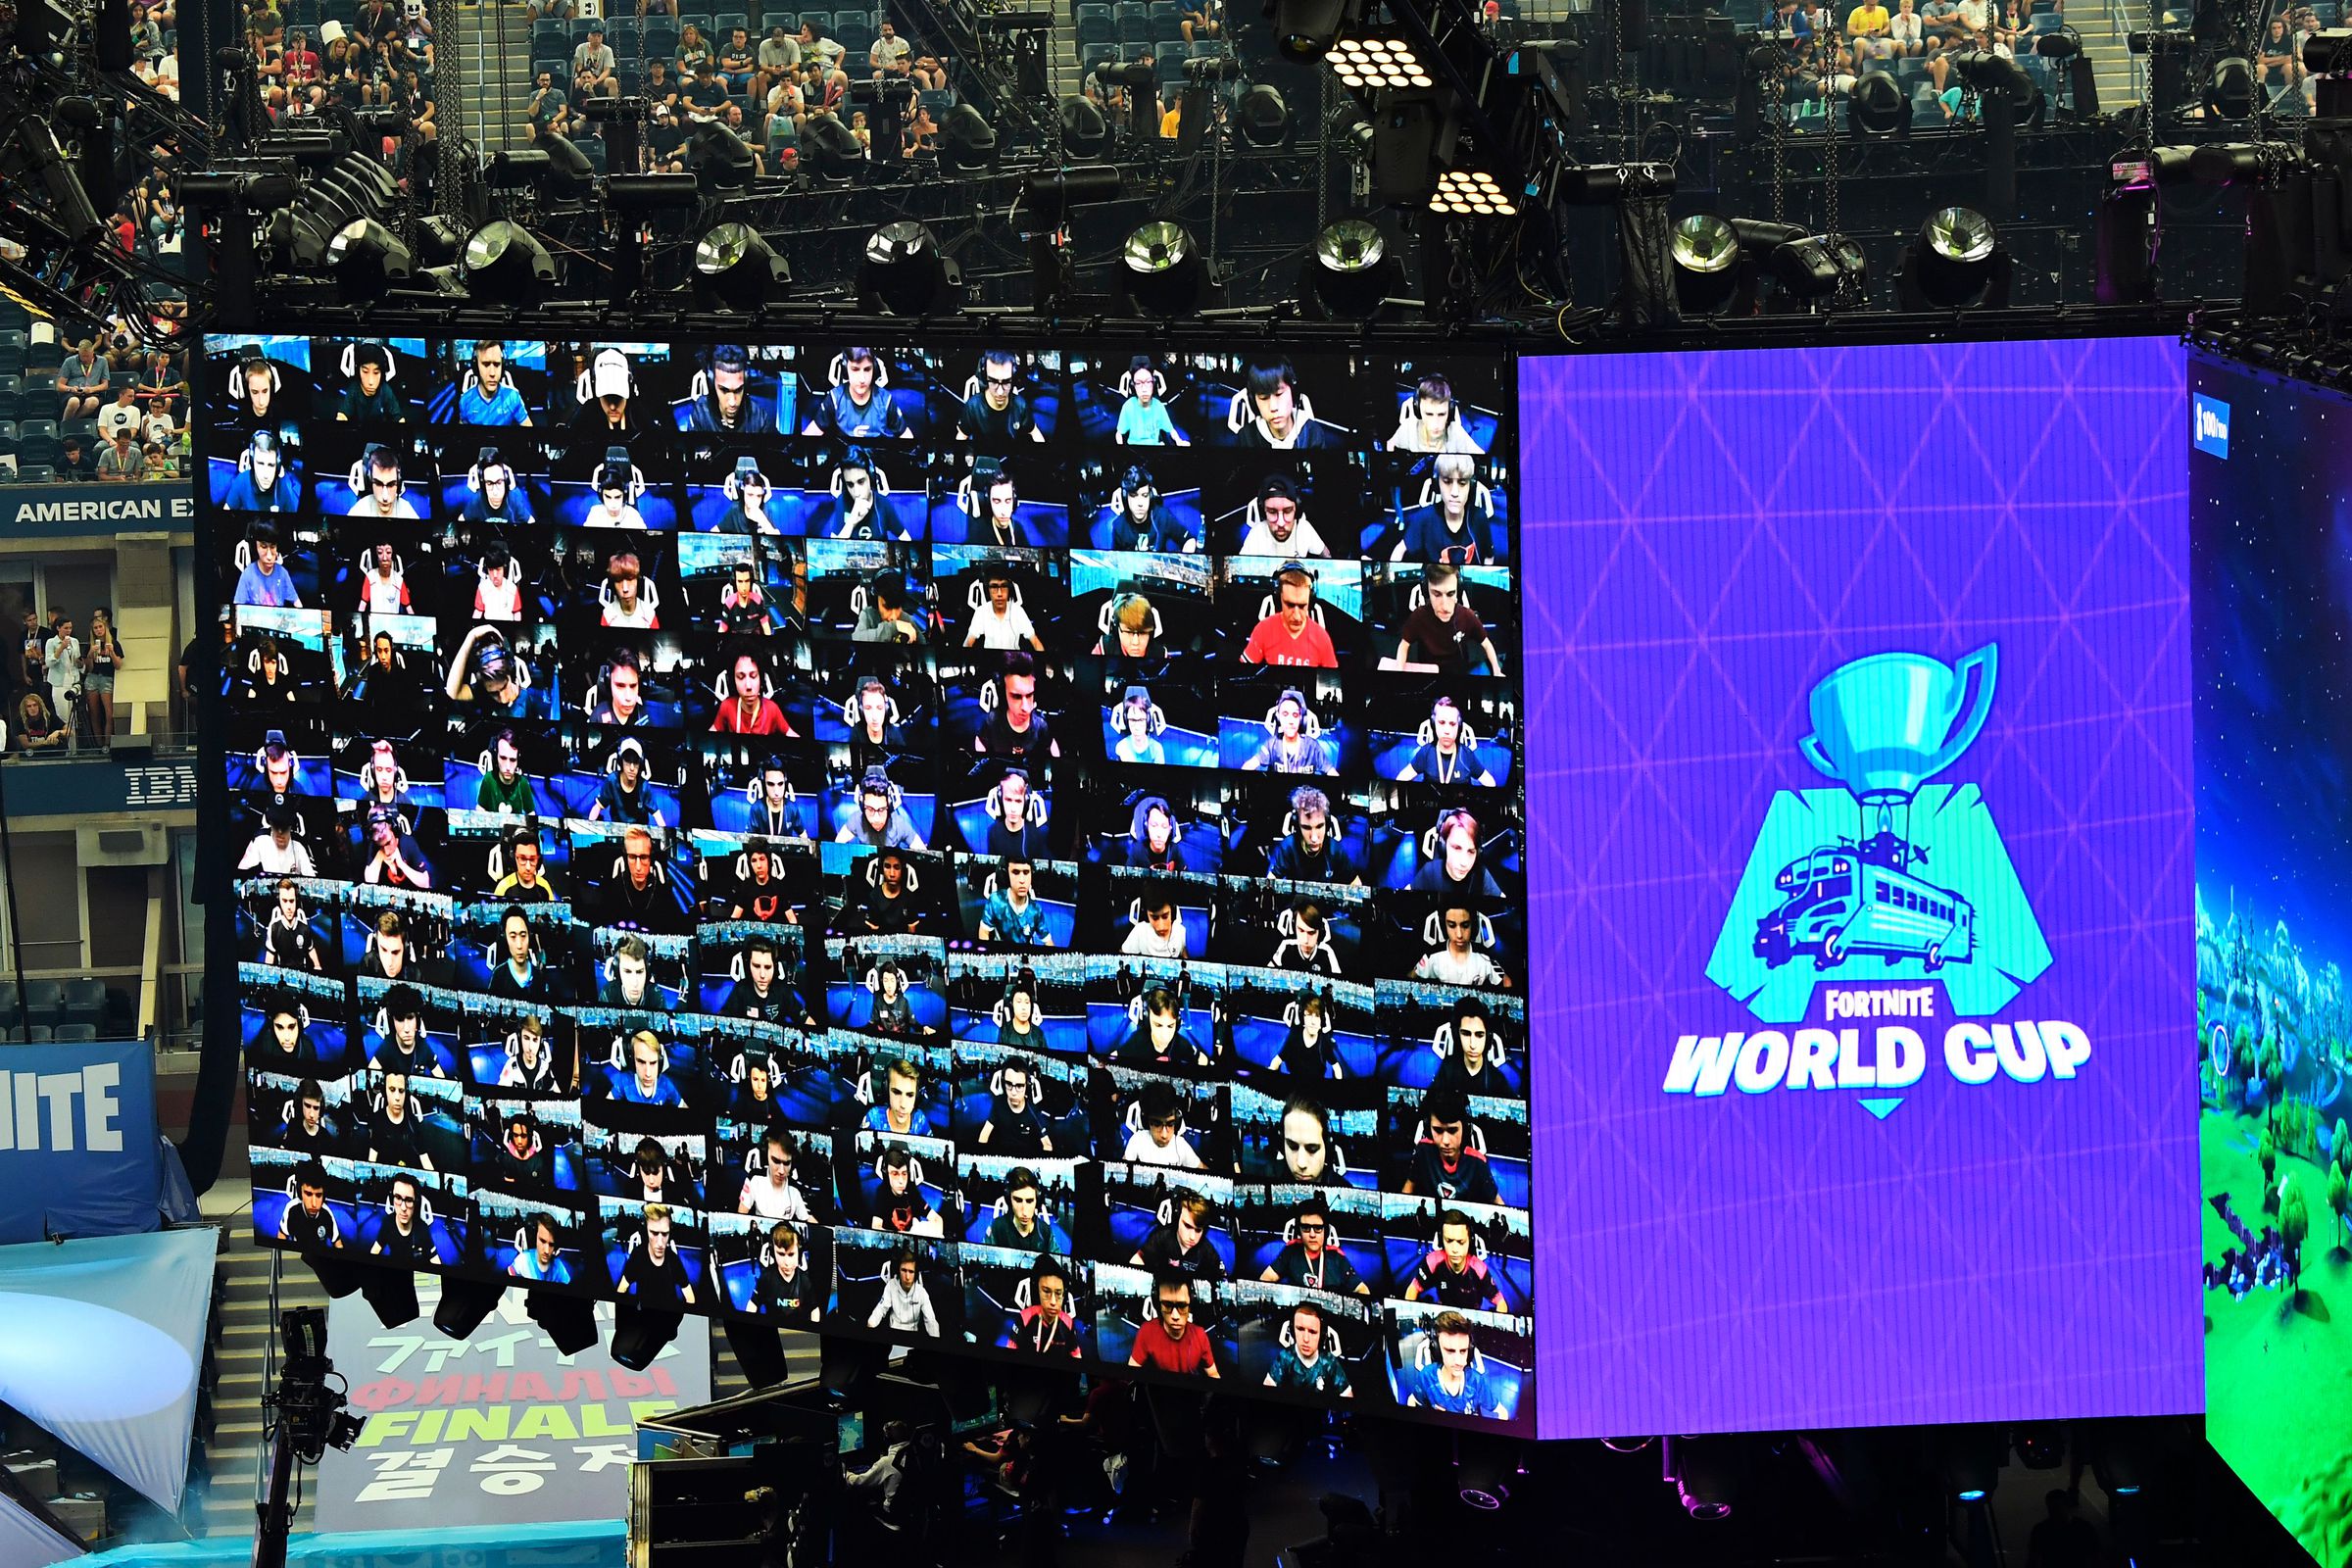 Players are seen onscreen during the final of the Solo competition at the 2019 Fortnite World Cup.